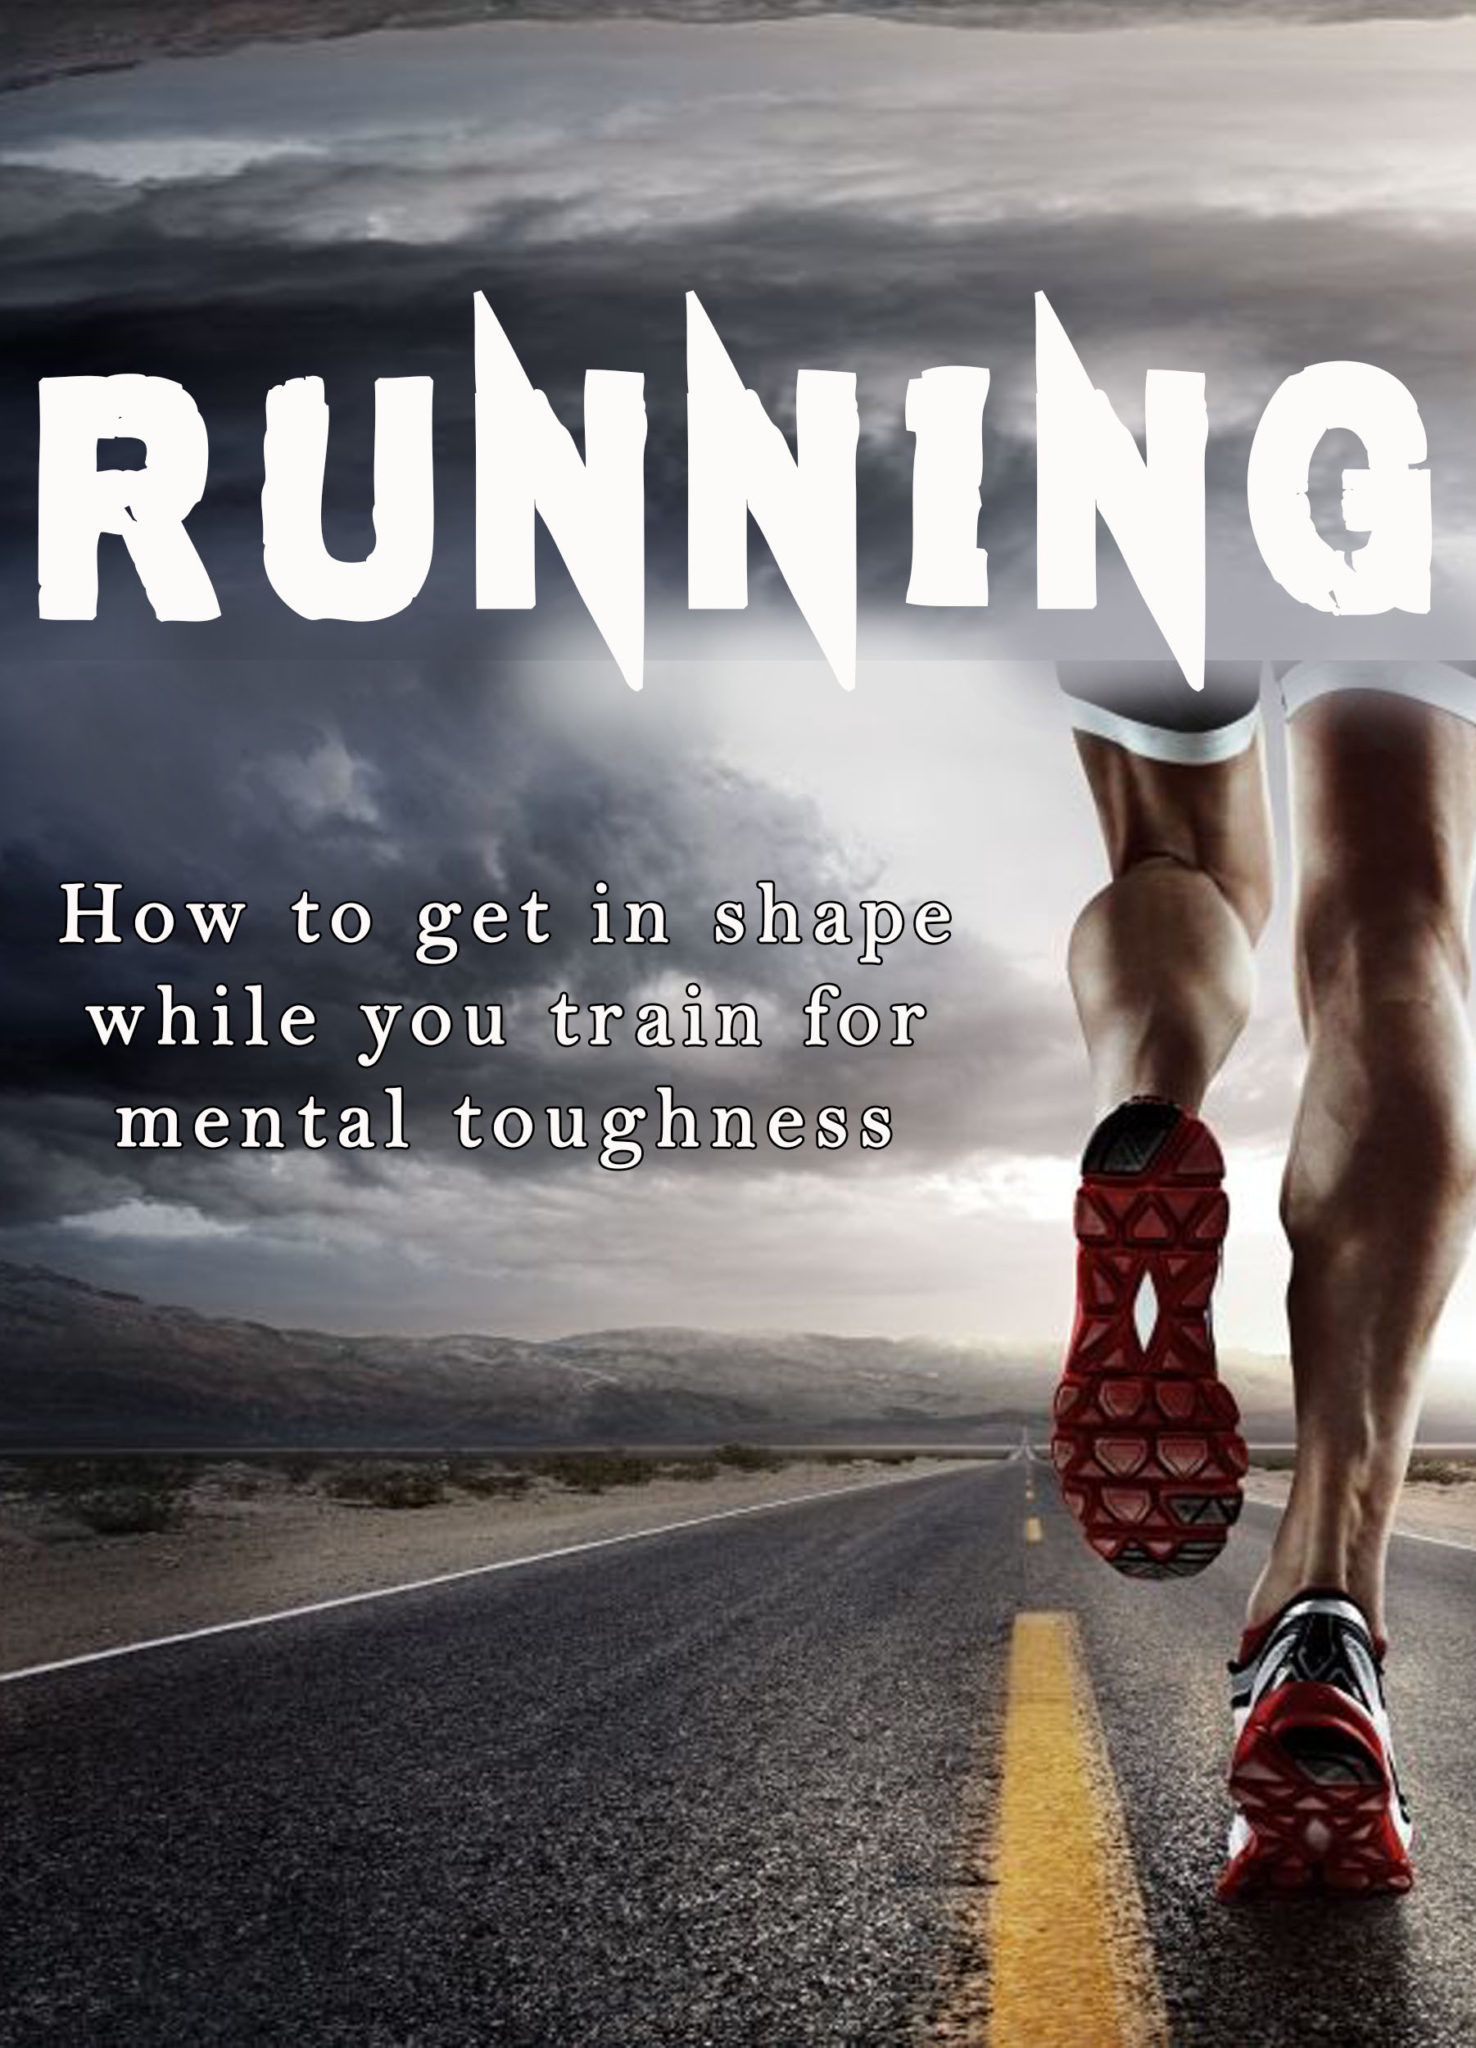 FREE: RUNNING How to get in shape while you train for mental toughness by Ian Powell